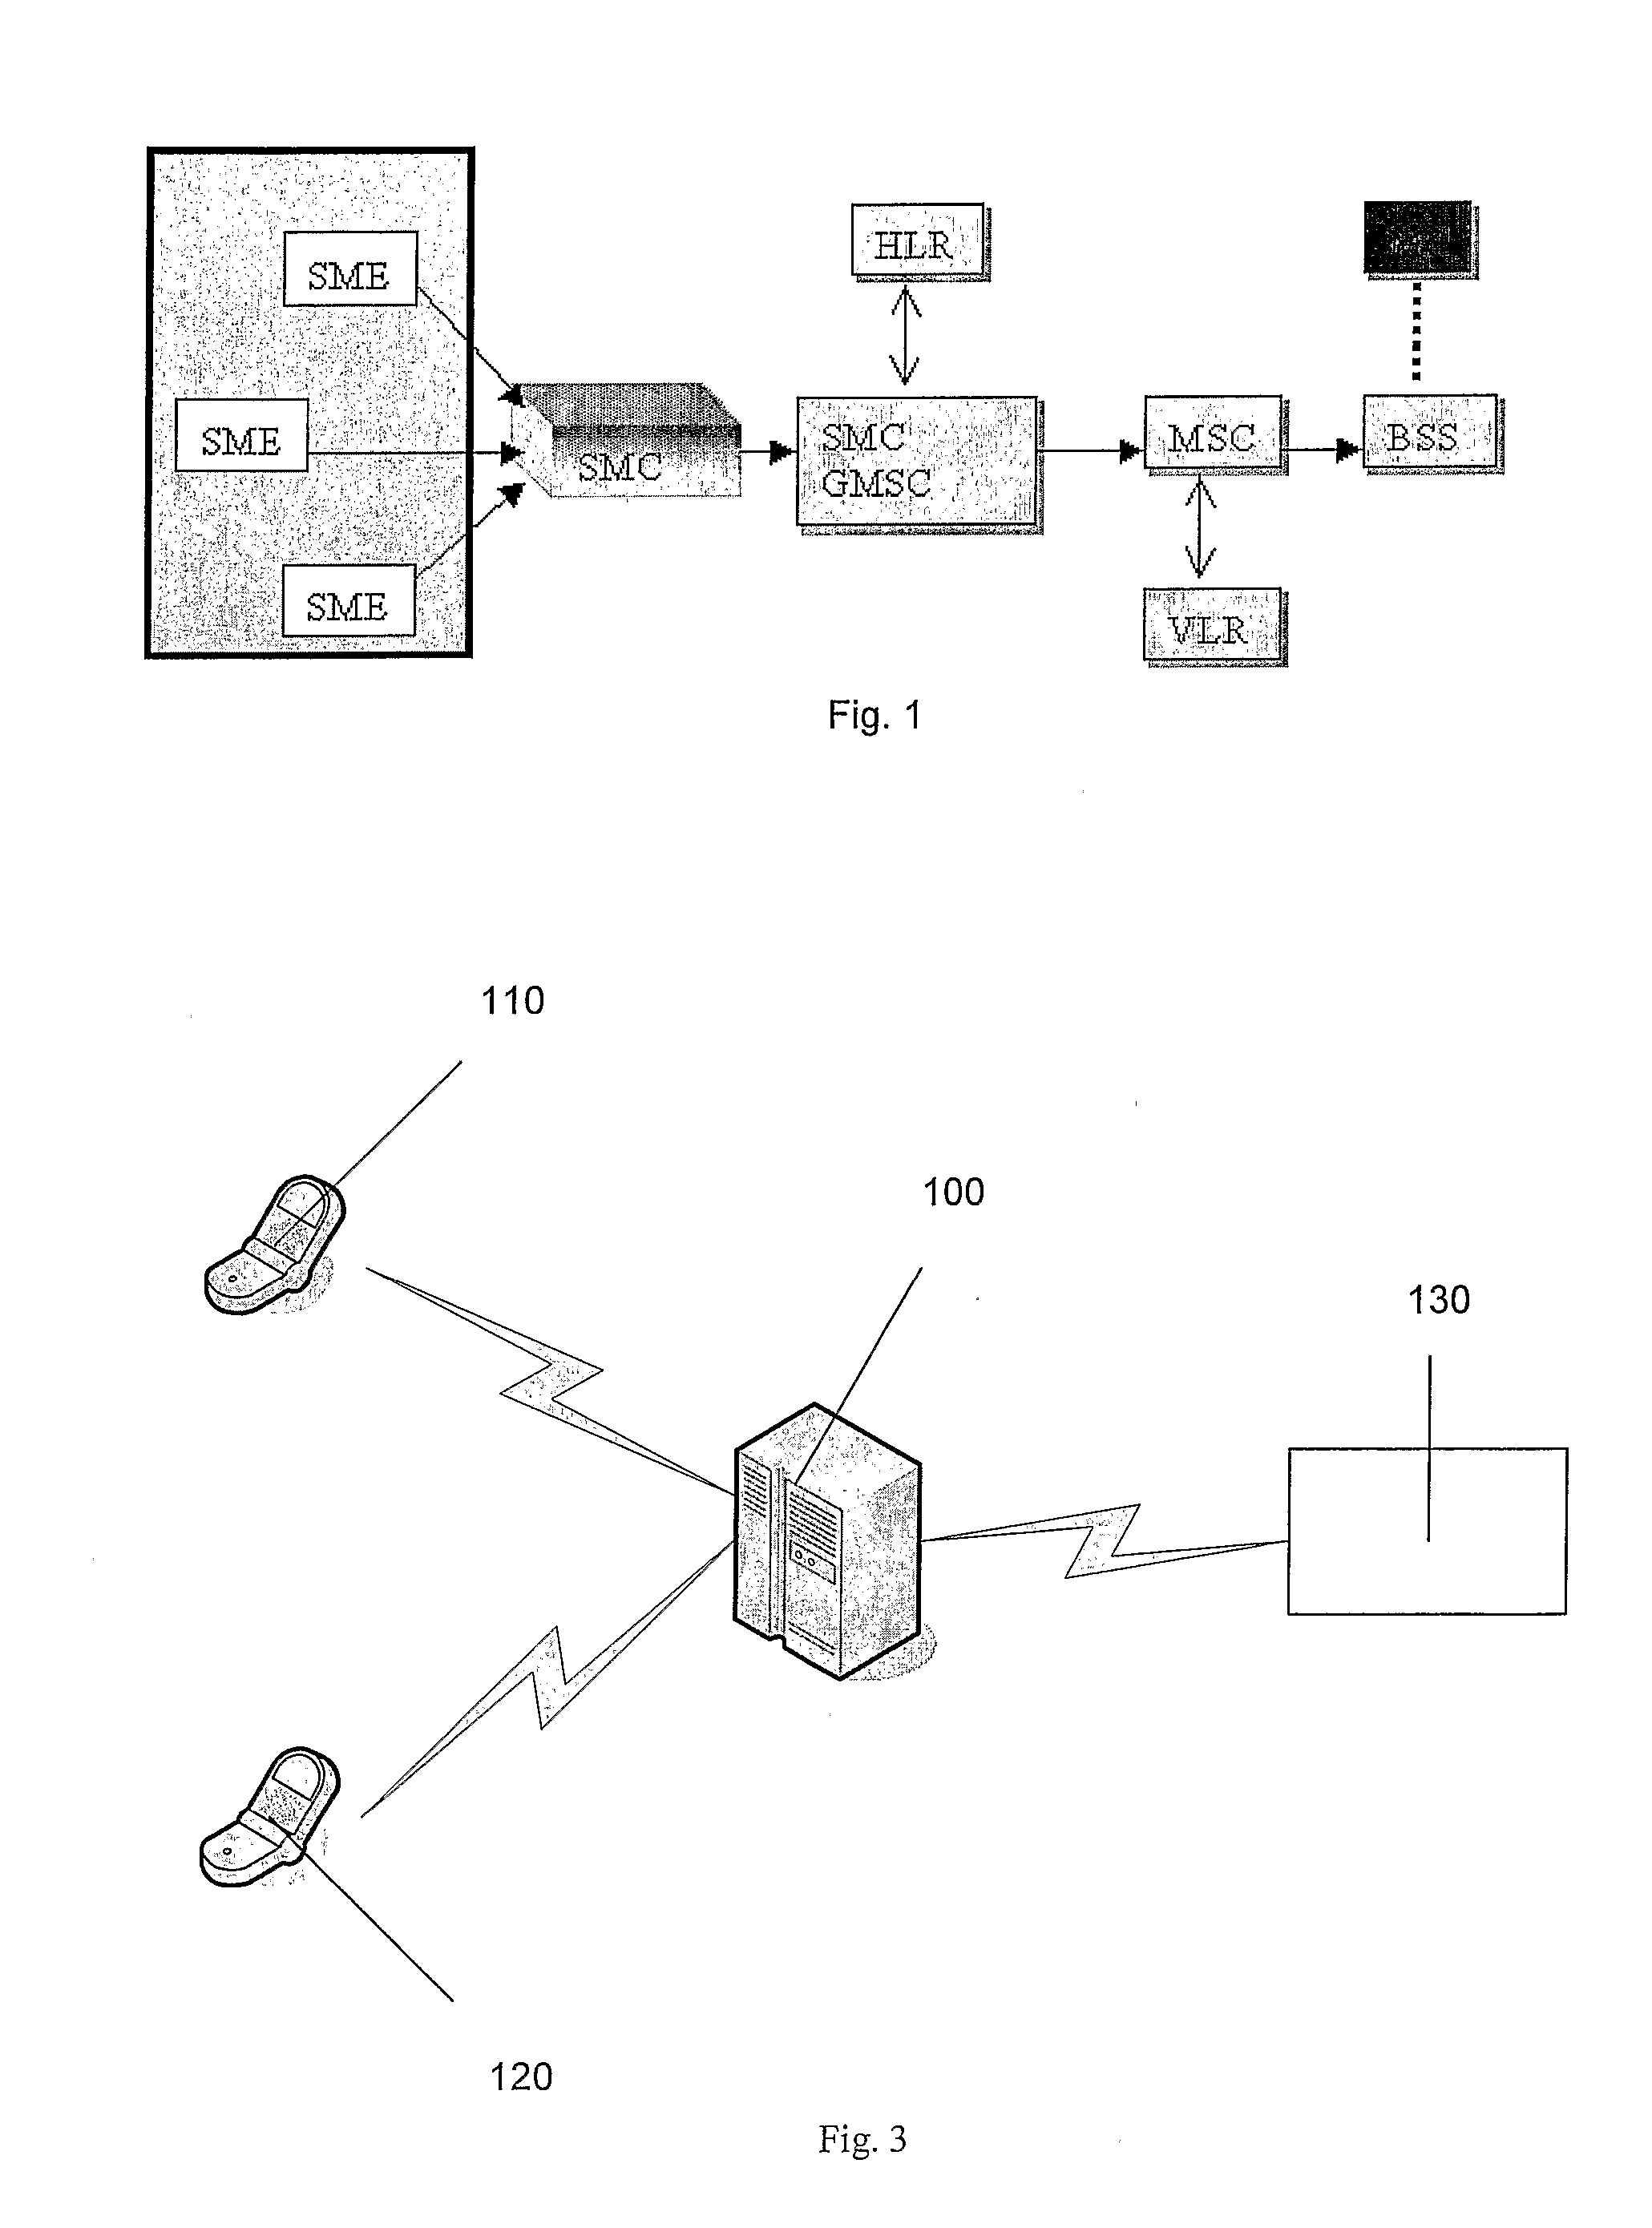 Method and System for Extending the Use and/or Application of Messaging Systems